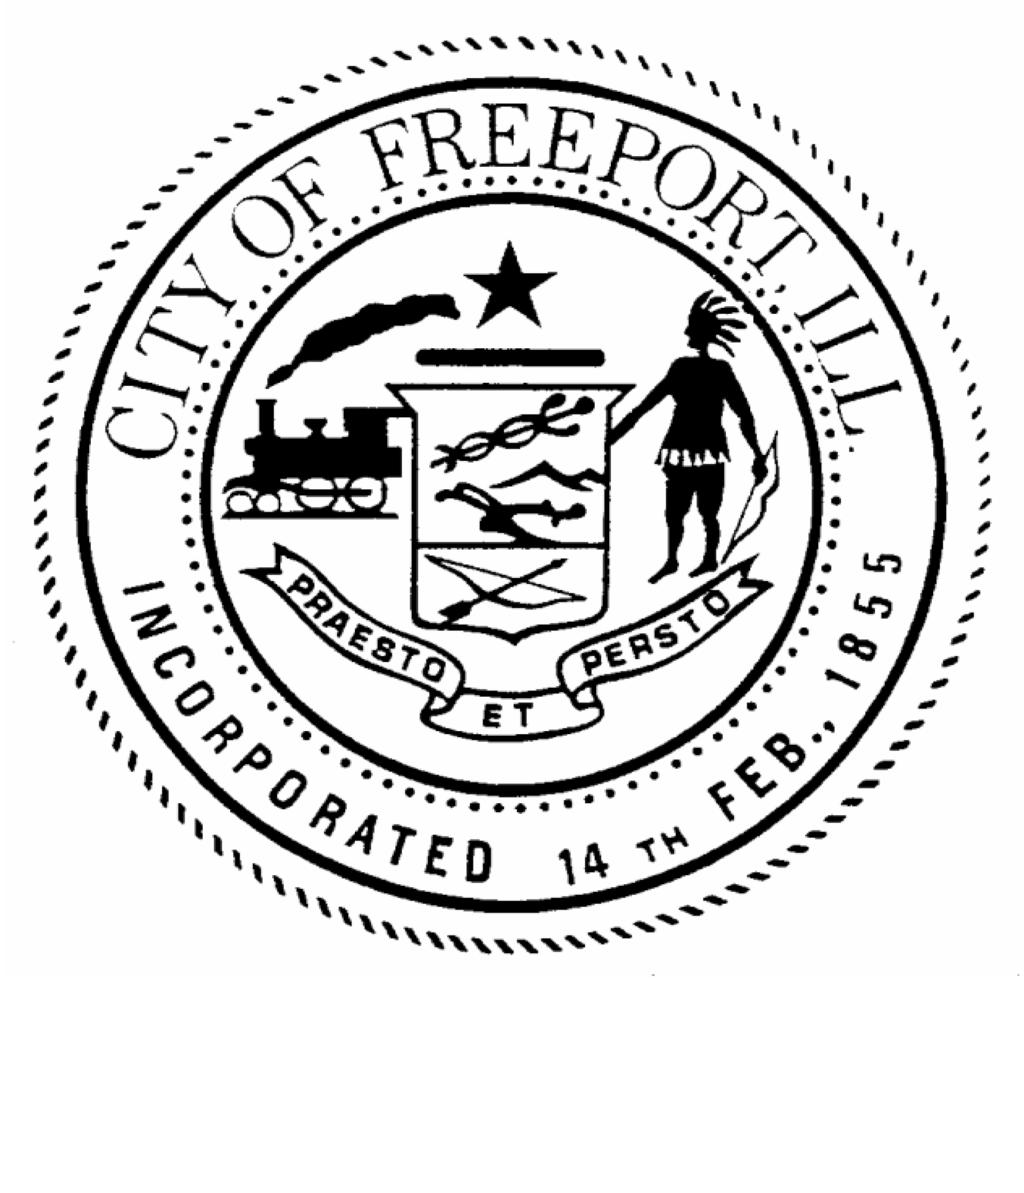 A1101 Don t miss this chance to join the City of Freeport Municipal Aggregation Electricity Program P.O.